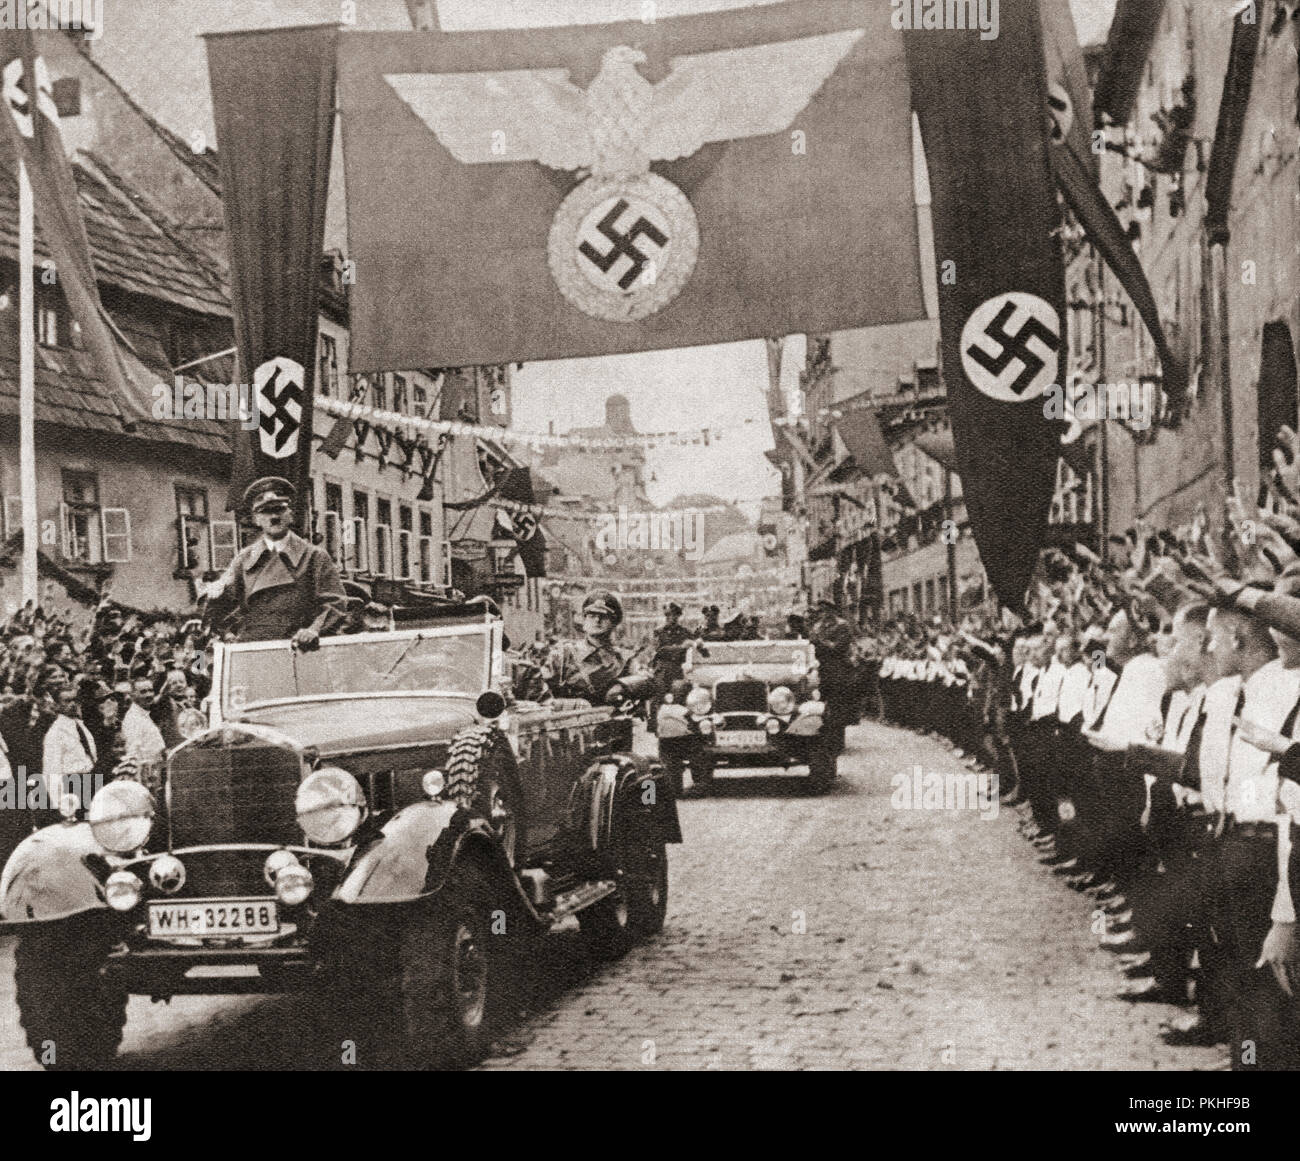 Adolf Hitler, on a victory drive, crossing the frontier from Germany into the Nazi Sudetenland districts of Czechoslovakia, October 3, 1938.   Adolf Hitler,1889 – 1945. German politician, demagogue, Pan-German revolutionary, leader of the Nazi Party, Chancellor of Germany, and Führer of Nazi Germany from 1934 to 1945.   From These Tremendous Years, published 1938. Stock Photo